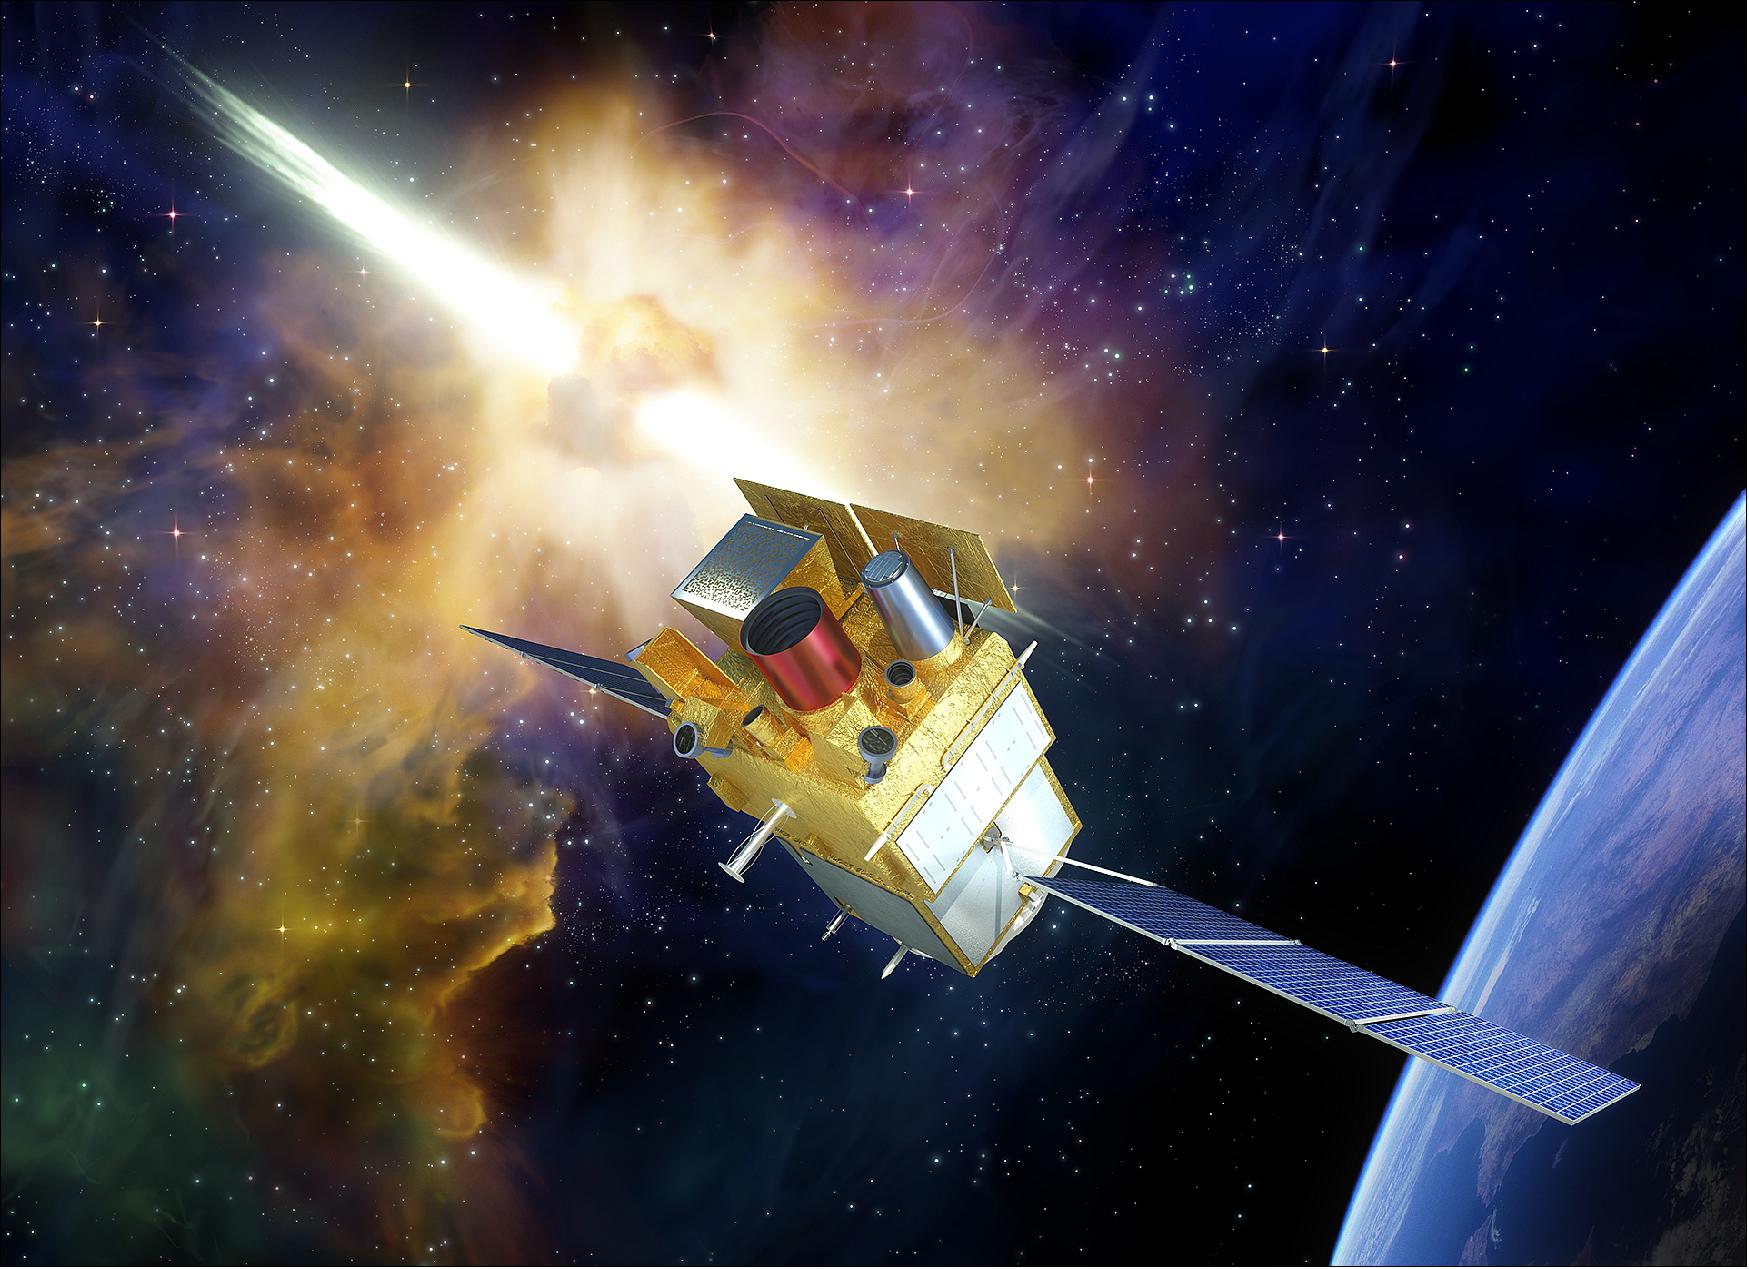 Figure 7: Artist's rendition of the deployed SVOM spacecraft (image credit: SVOM collaboration) 19)